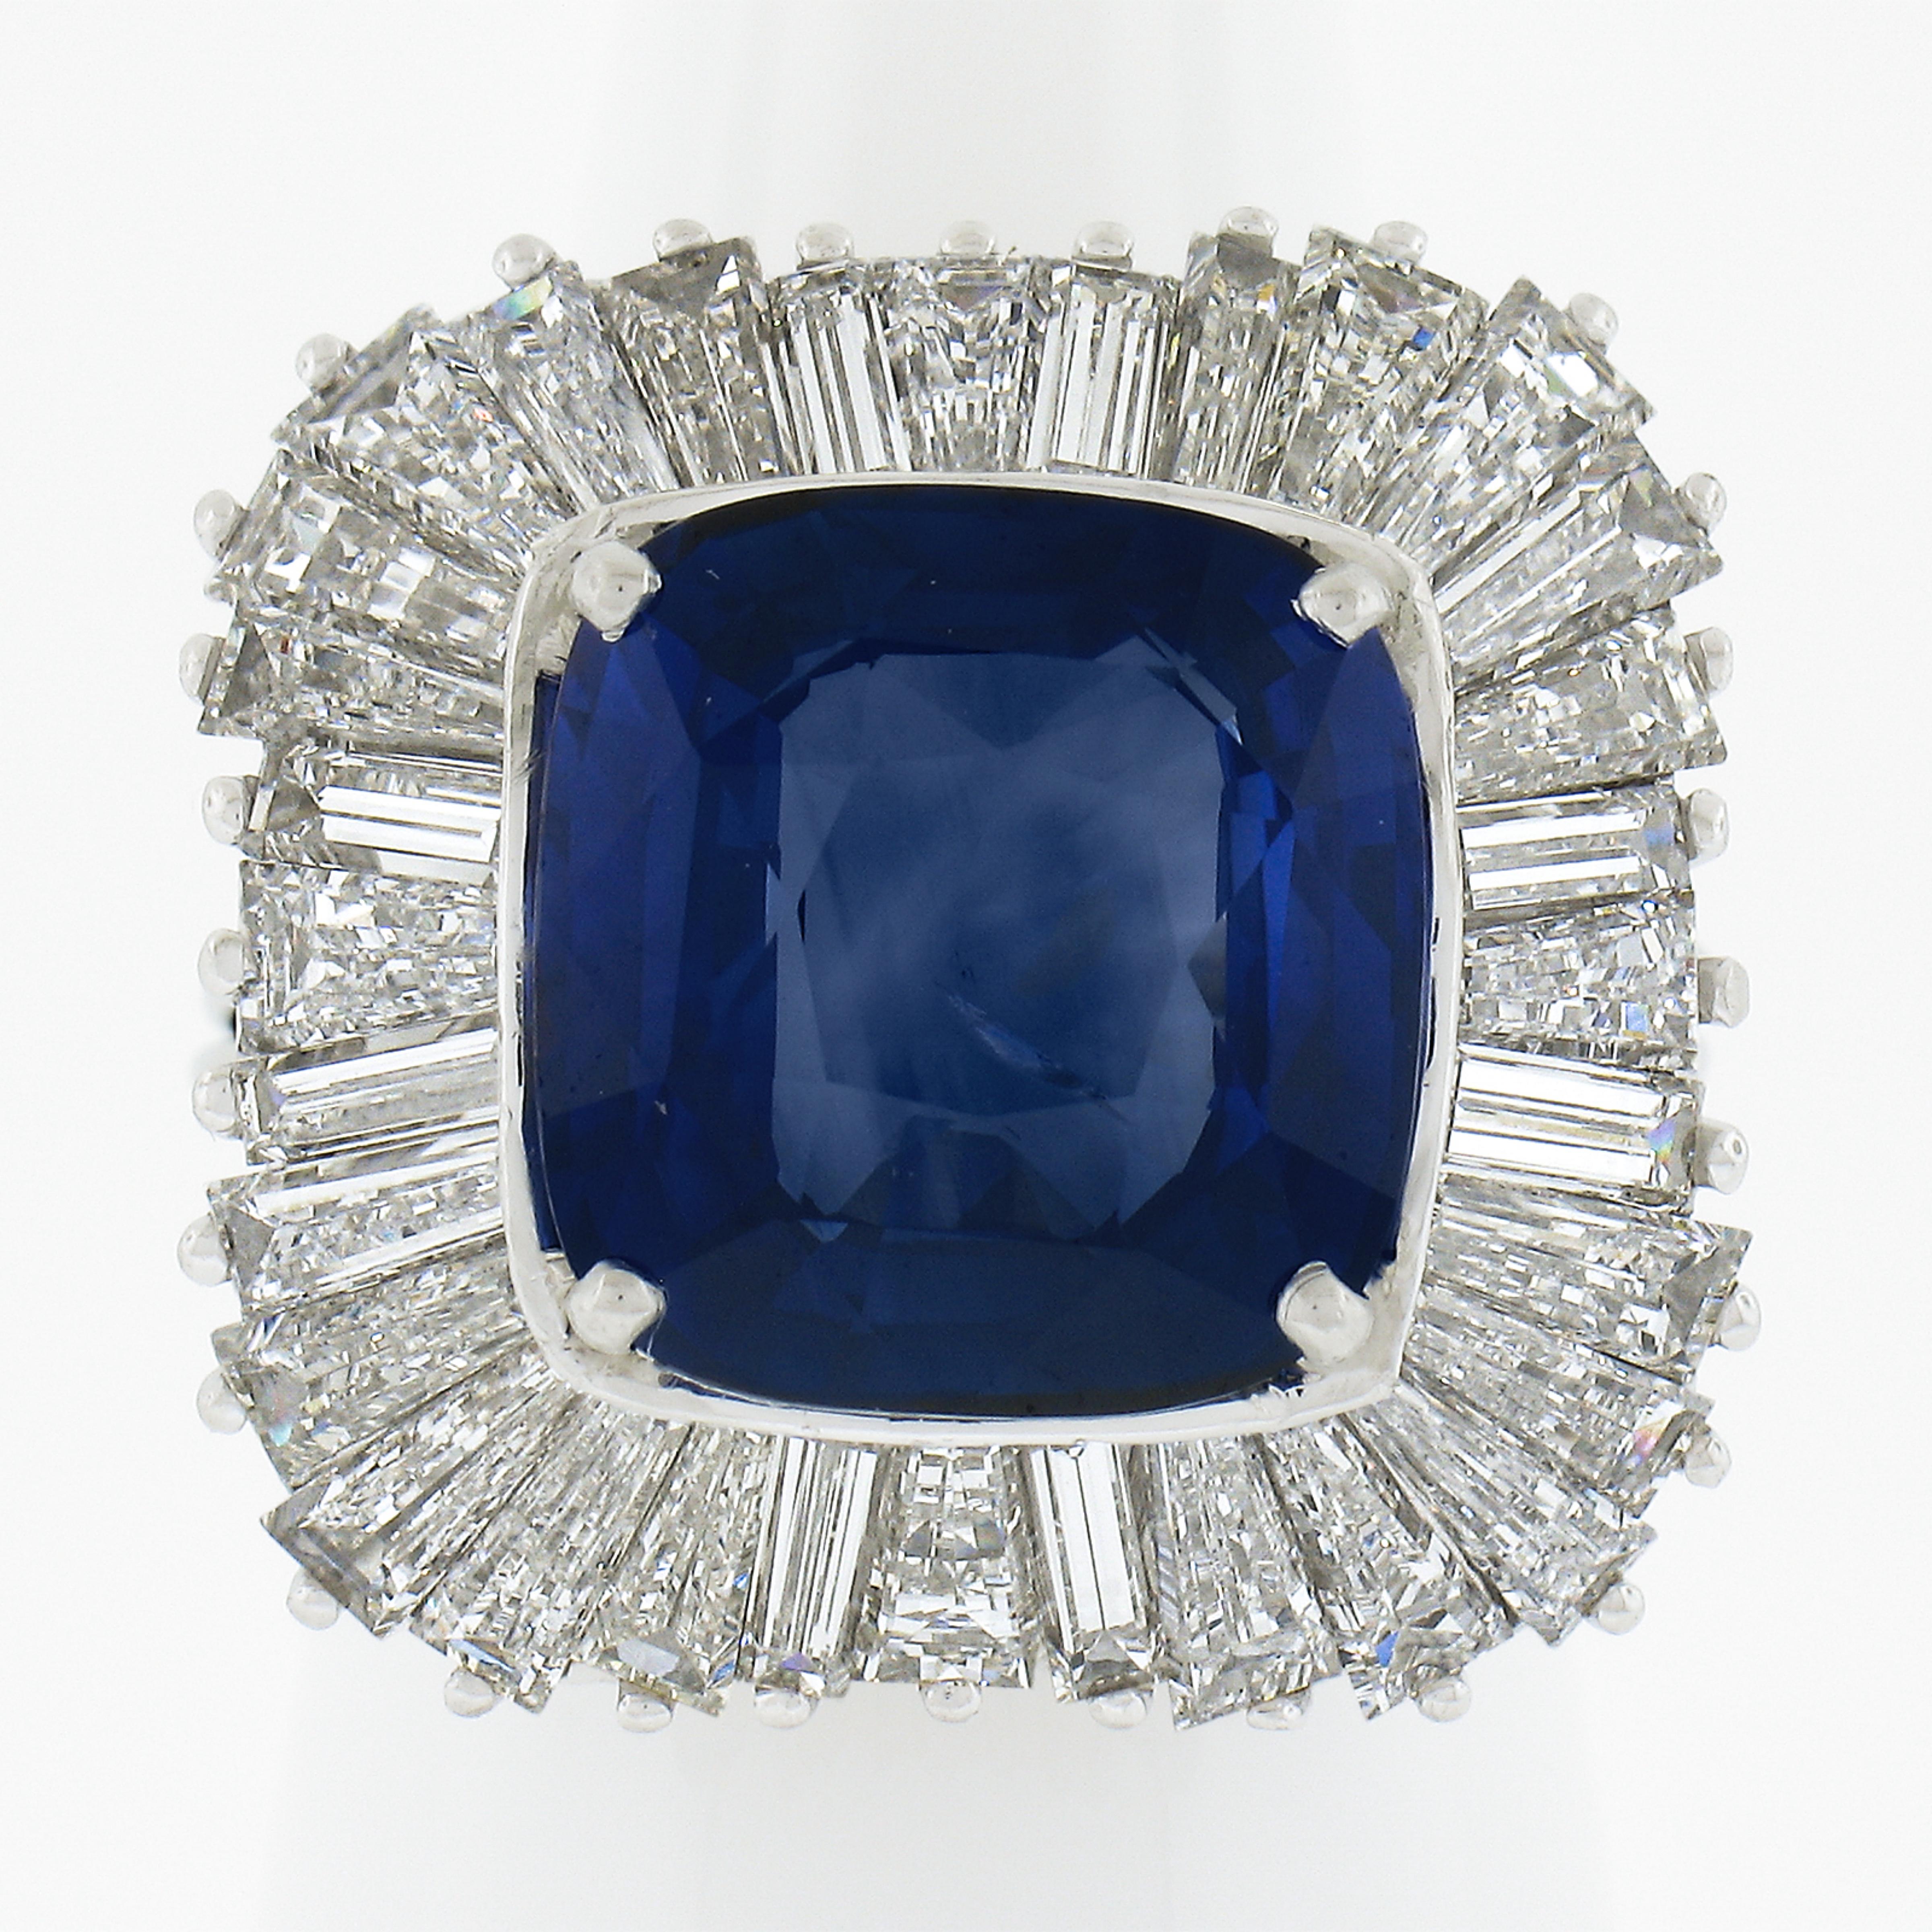 --Stone(s):--
(1) Natural Genuine Sapphire - Cushion Brilliant Cut - Prong Set True Royal Blue Color - Ceylon - HEAT - 8.86ct (exact - certified)
** See Certification Details Below For More Info **
(32) Natural Genuine Diamonds - Tapered Straight